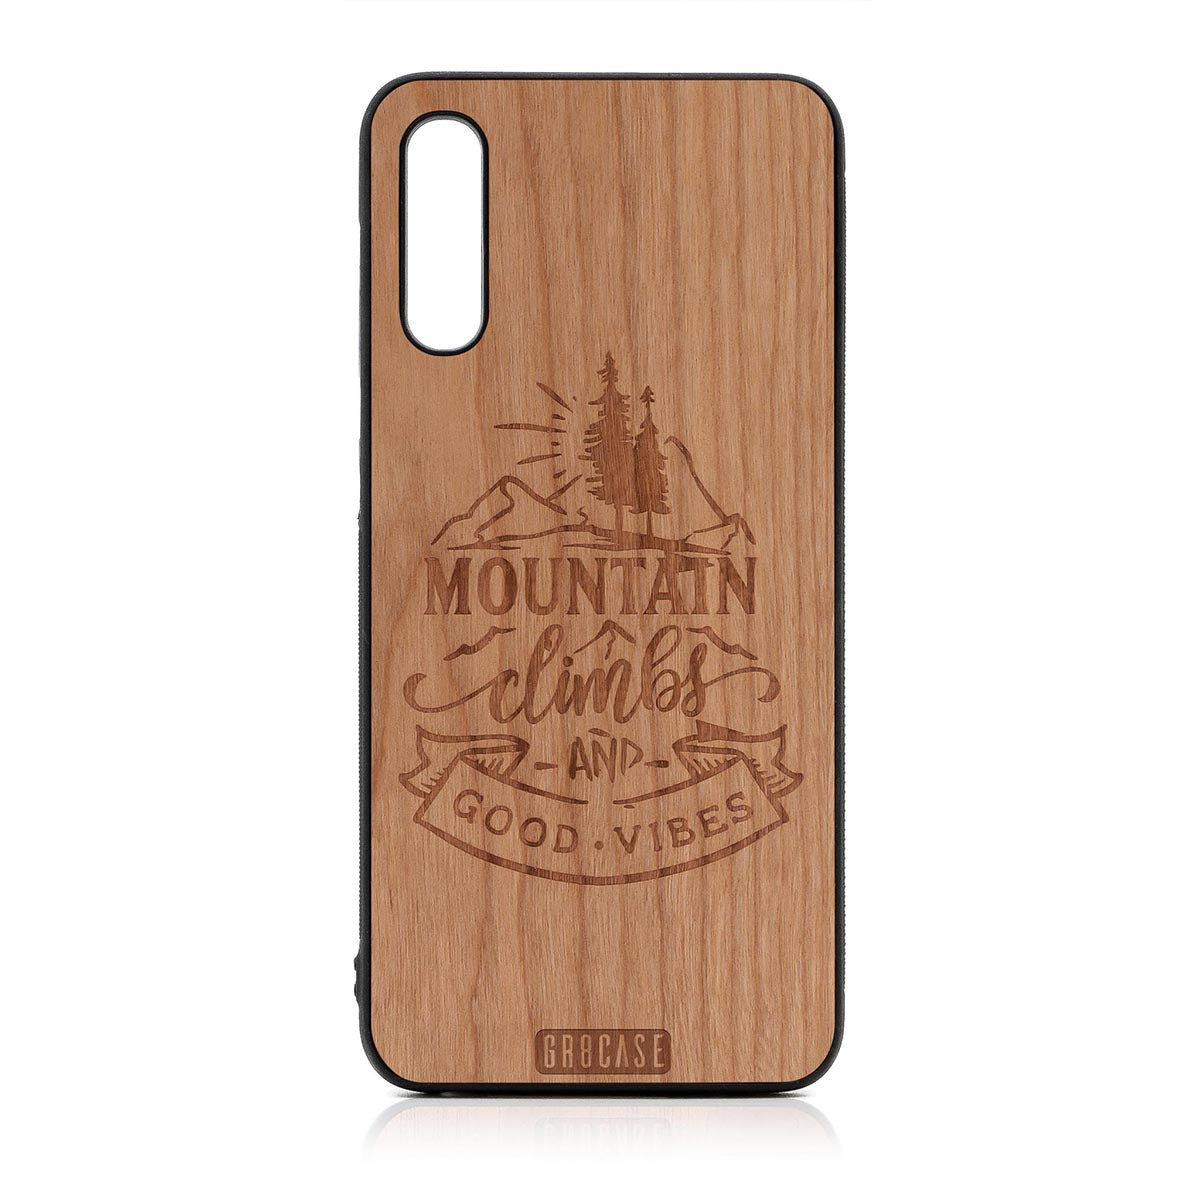 Mountain Climbs And Good Vibes Design Wood Case For Samsung Galaxy A50 by GR8CASE